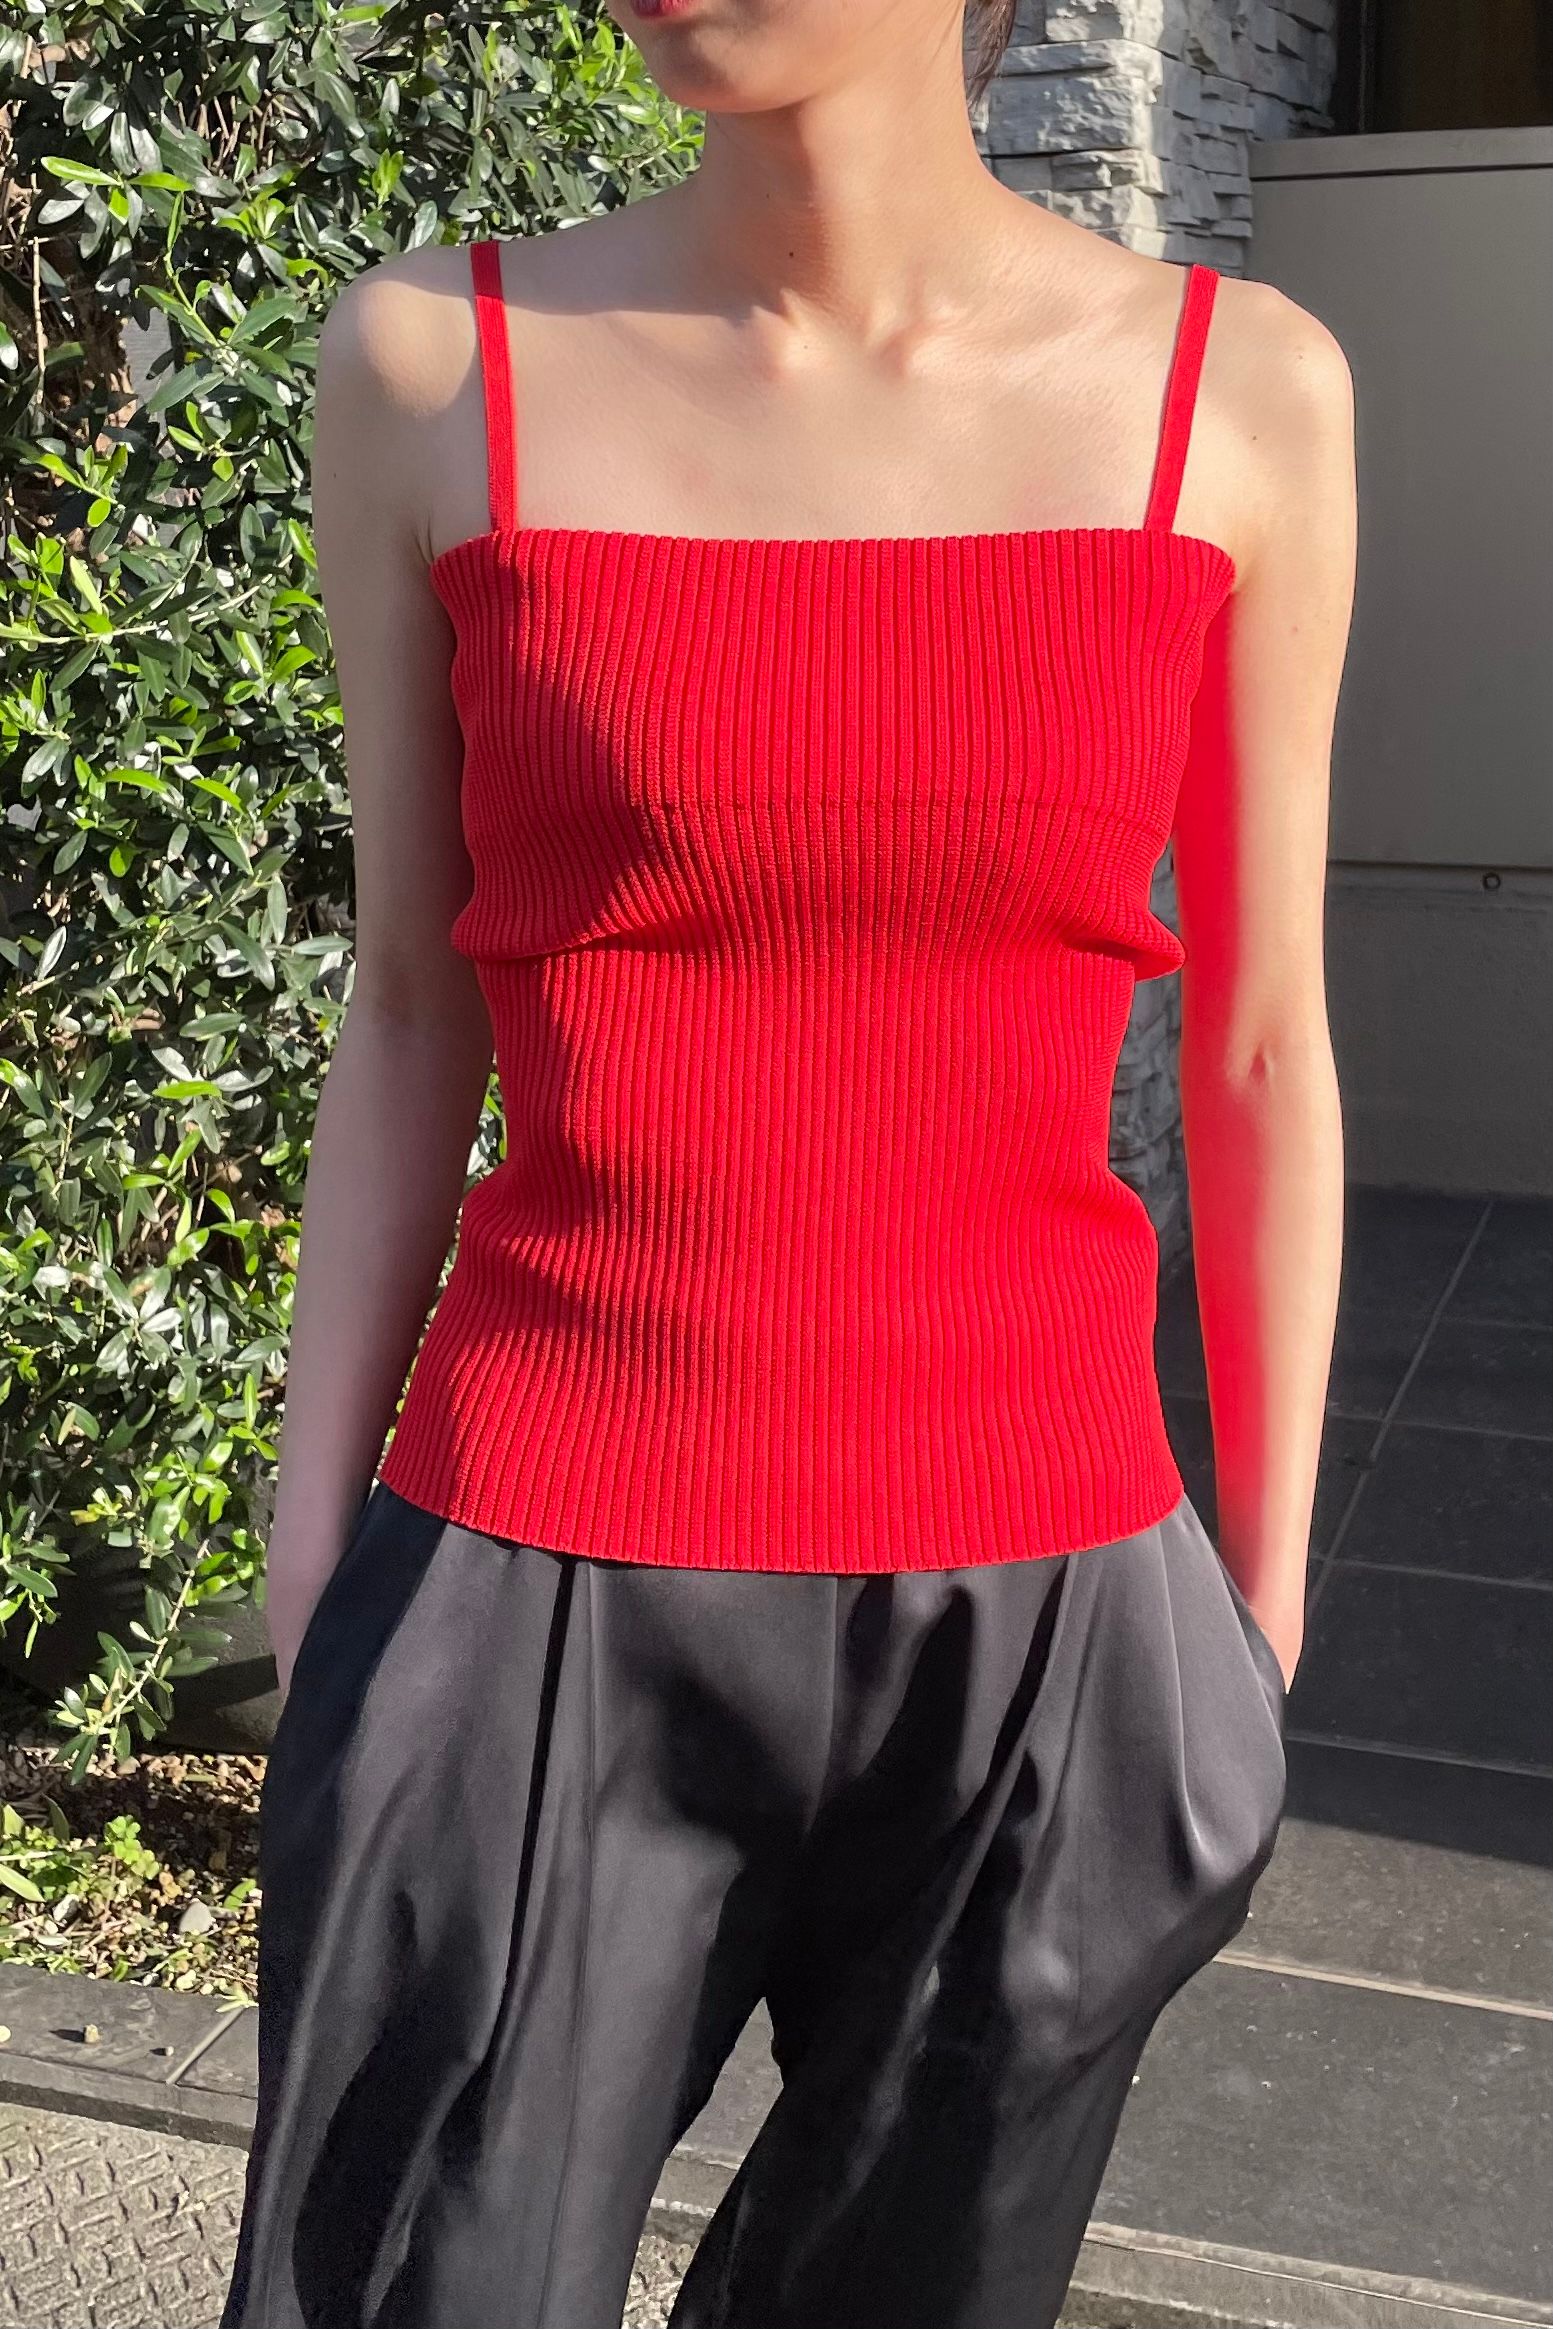 IIROT   rib camisole  red  ss   asterisk